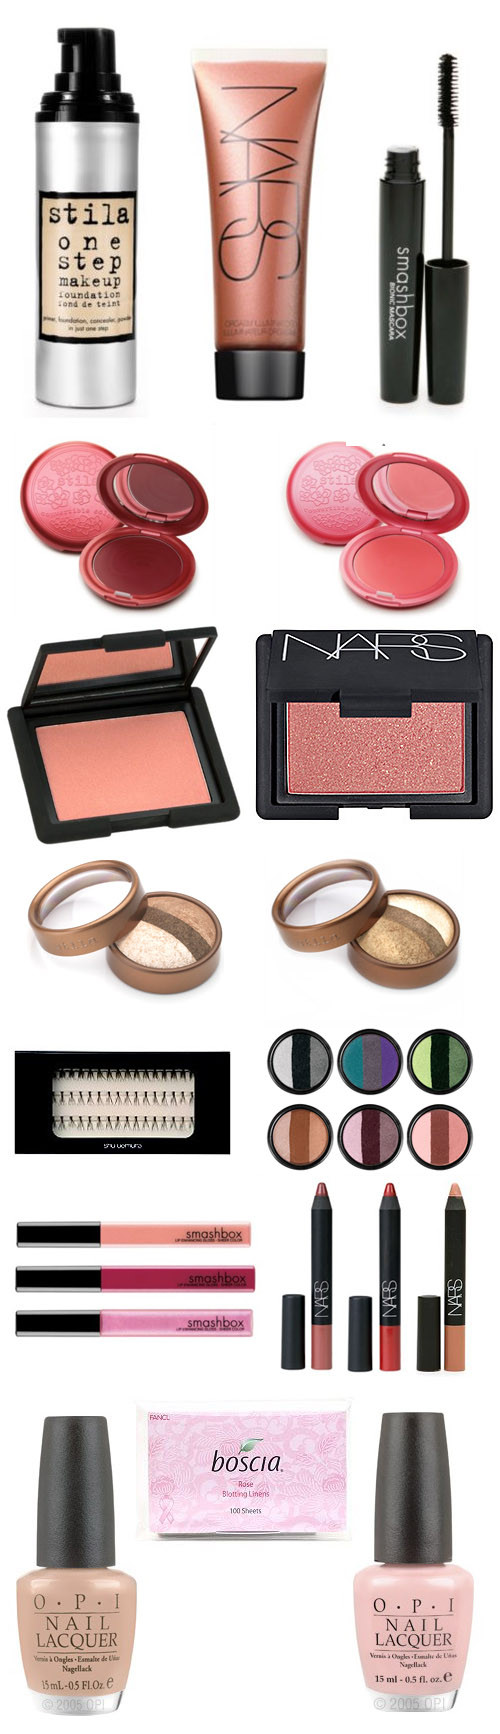 Wedding Makeup Products
 Bridal Makeup Picks from Margaret Dybash of Poppy Artistry